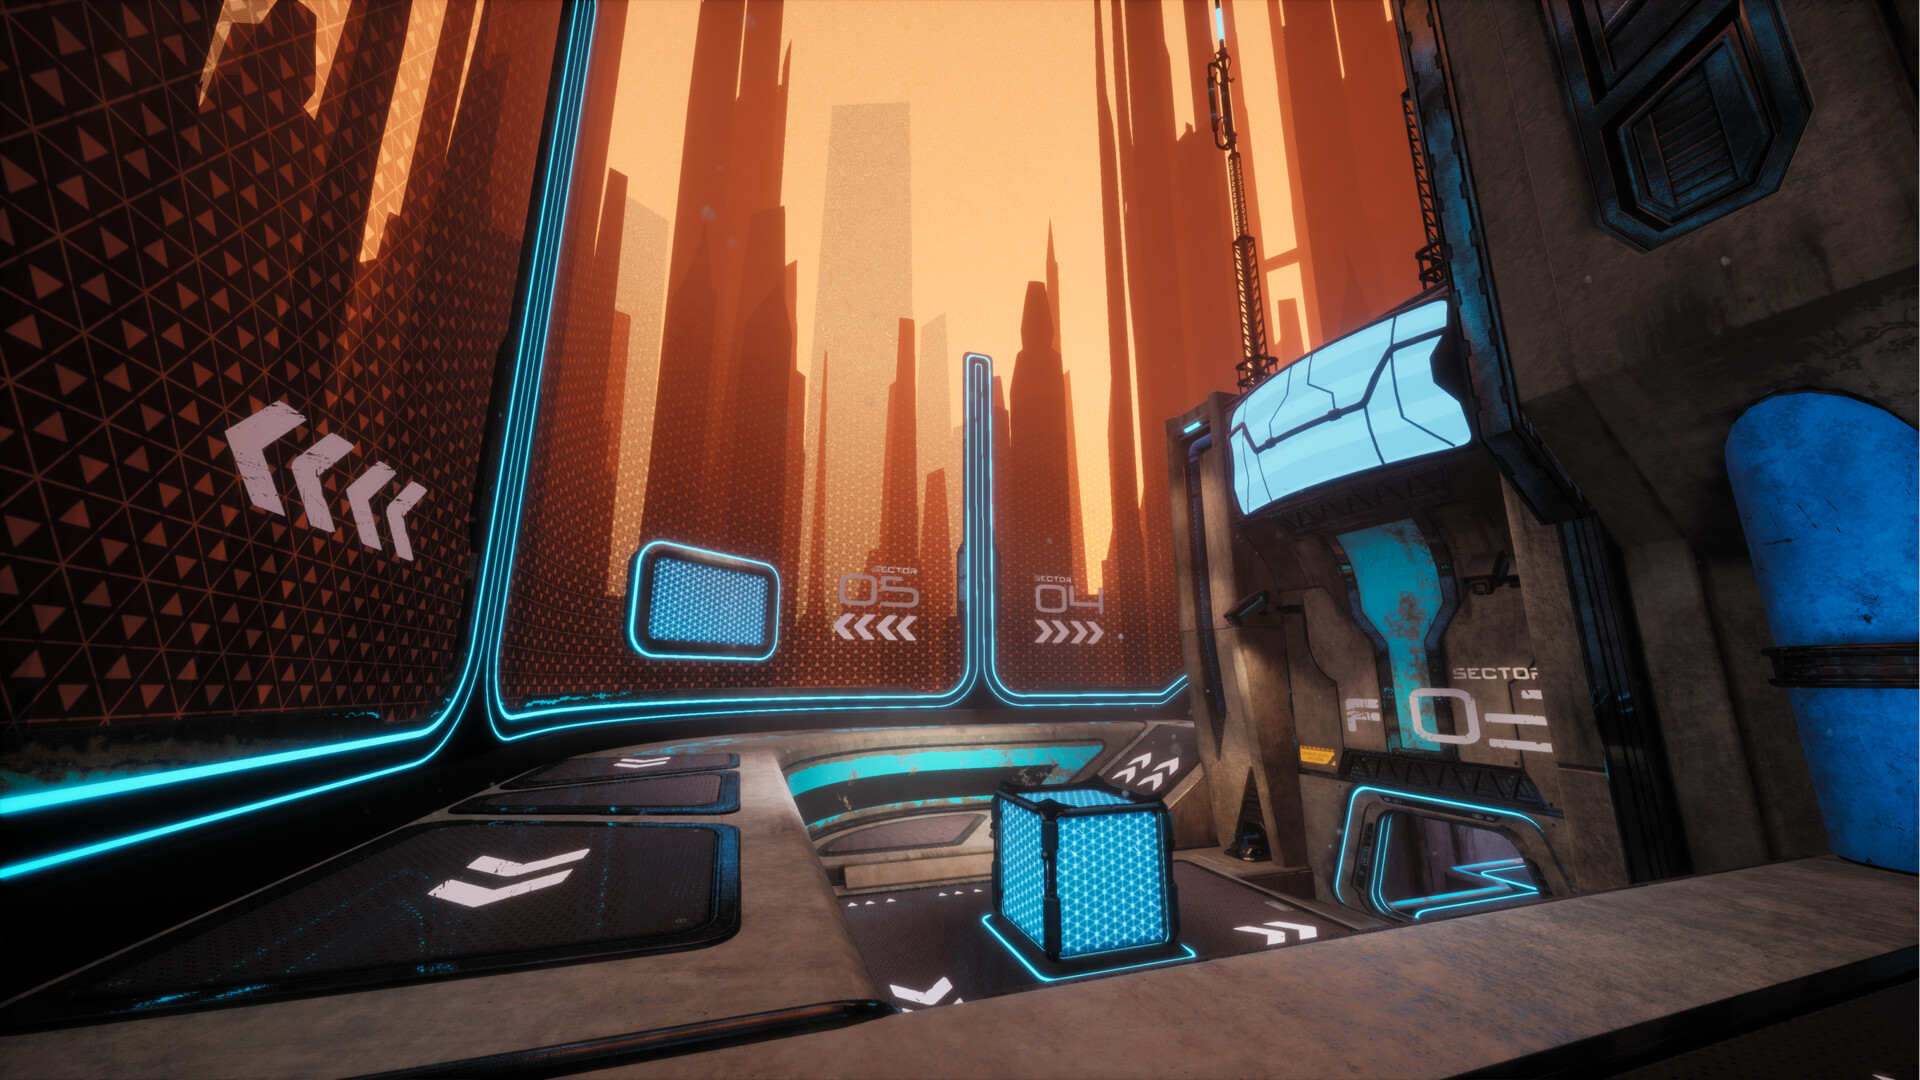 Splitgate: Arena Warfare - Hands-on preview from GDC 2019